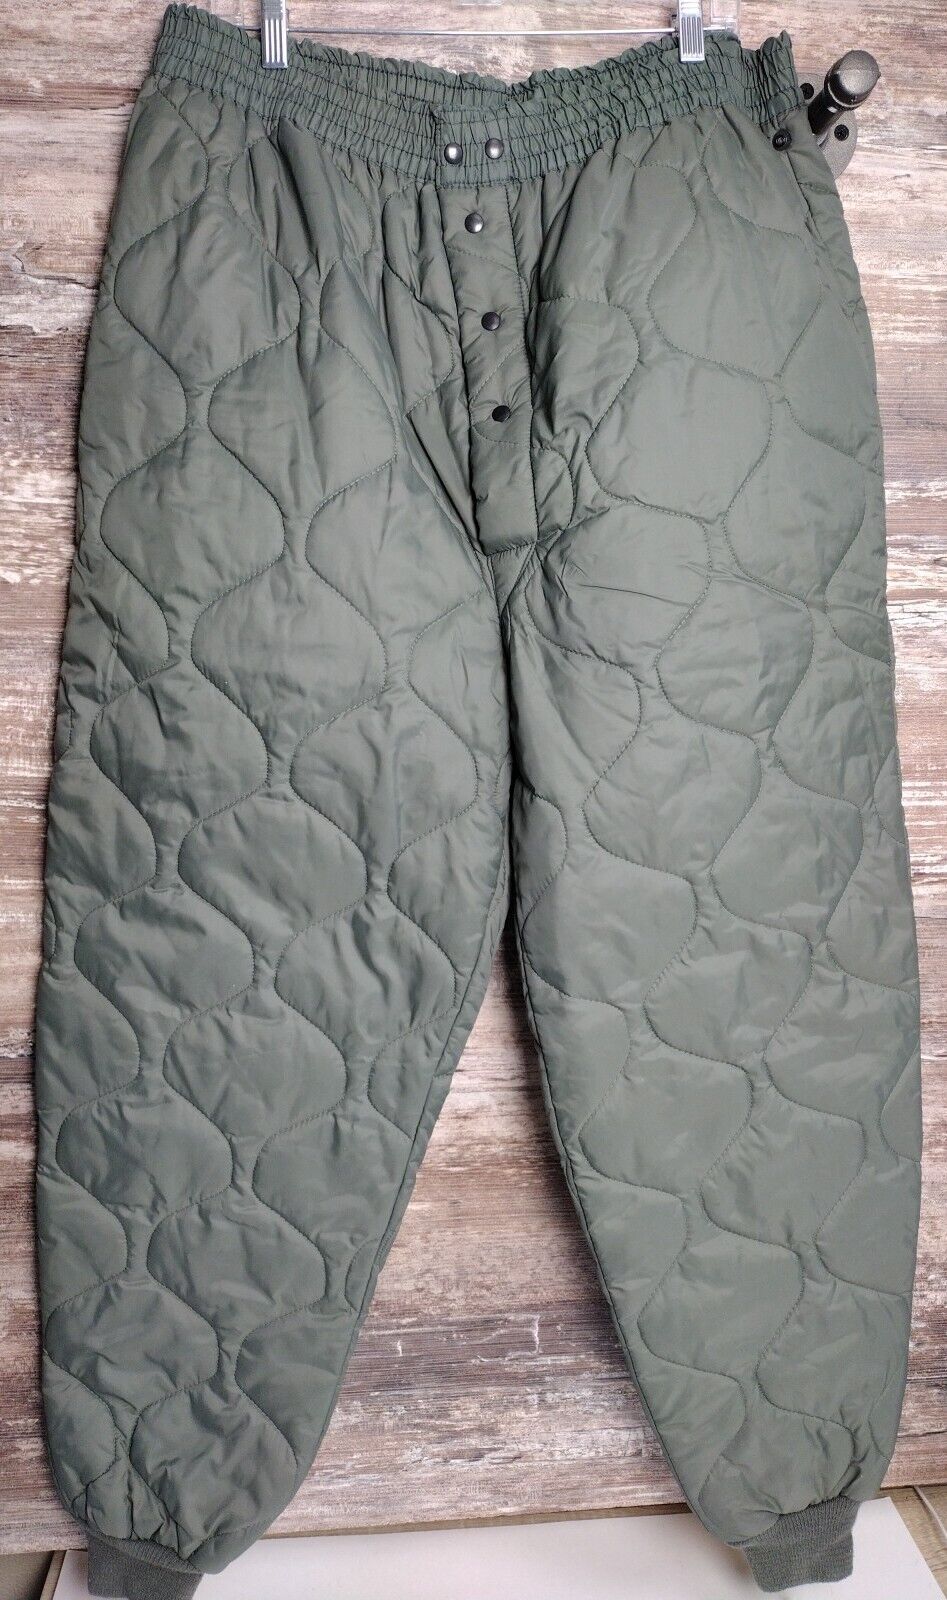 Vintage Deadstock Military Flyers Liner Pants Trousers 1970s Green Puffer Pants